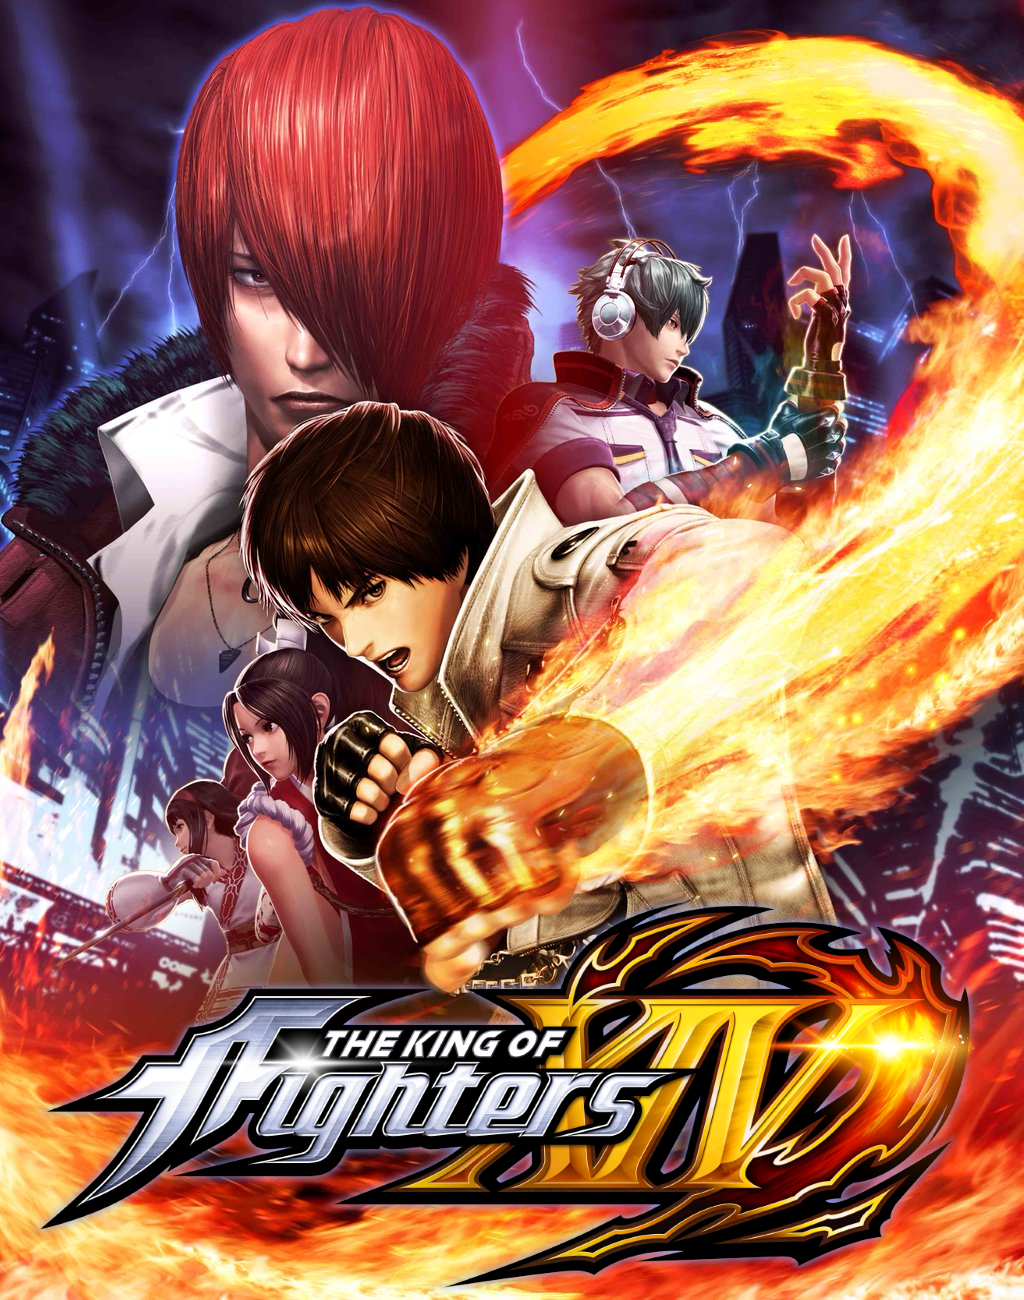 The King Of Fighters Xiv High Quality Background On - King Of Fighters Xiv Steam Edition Pc - HD Wallpaper 